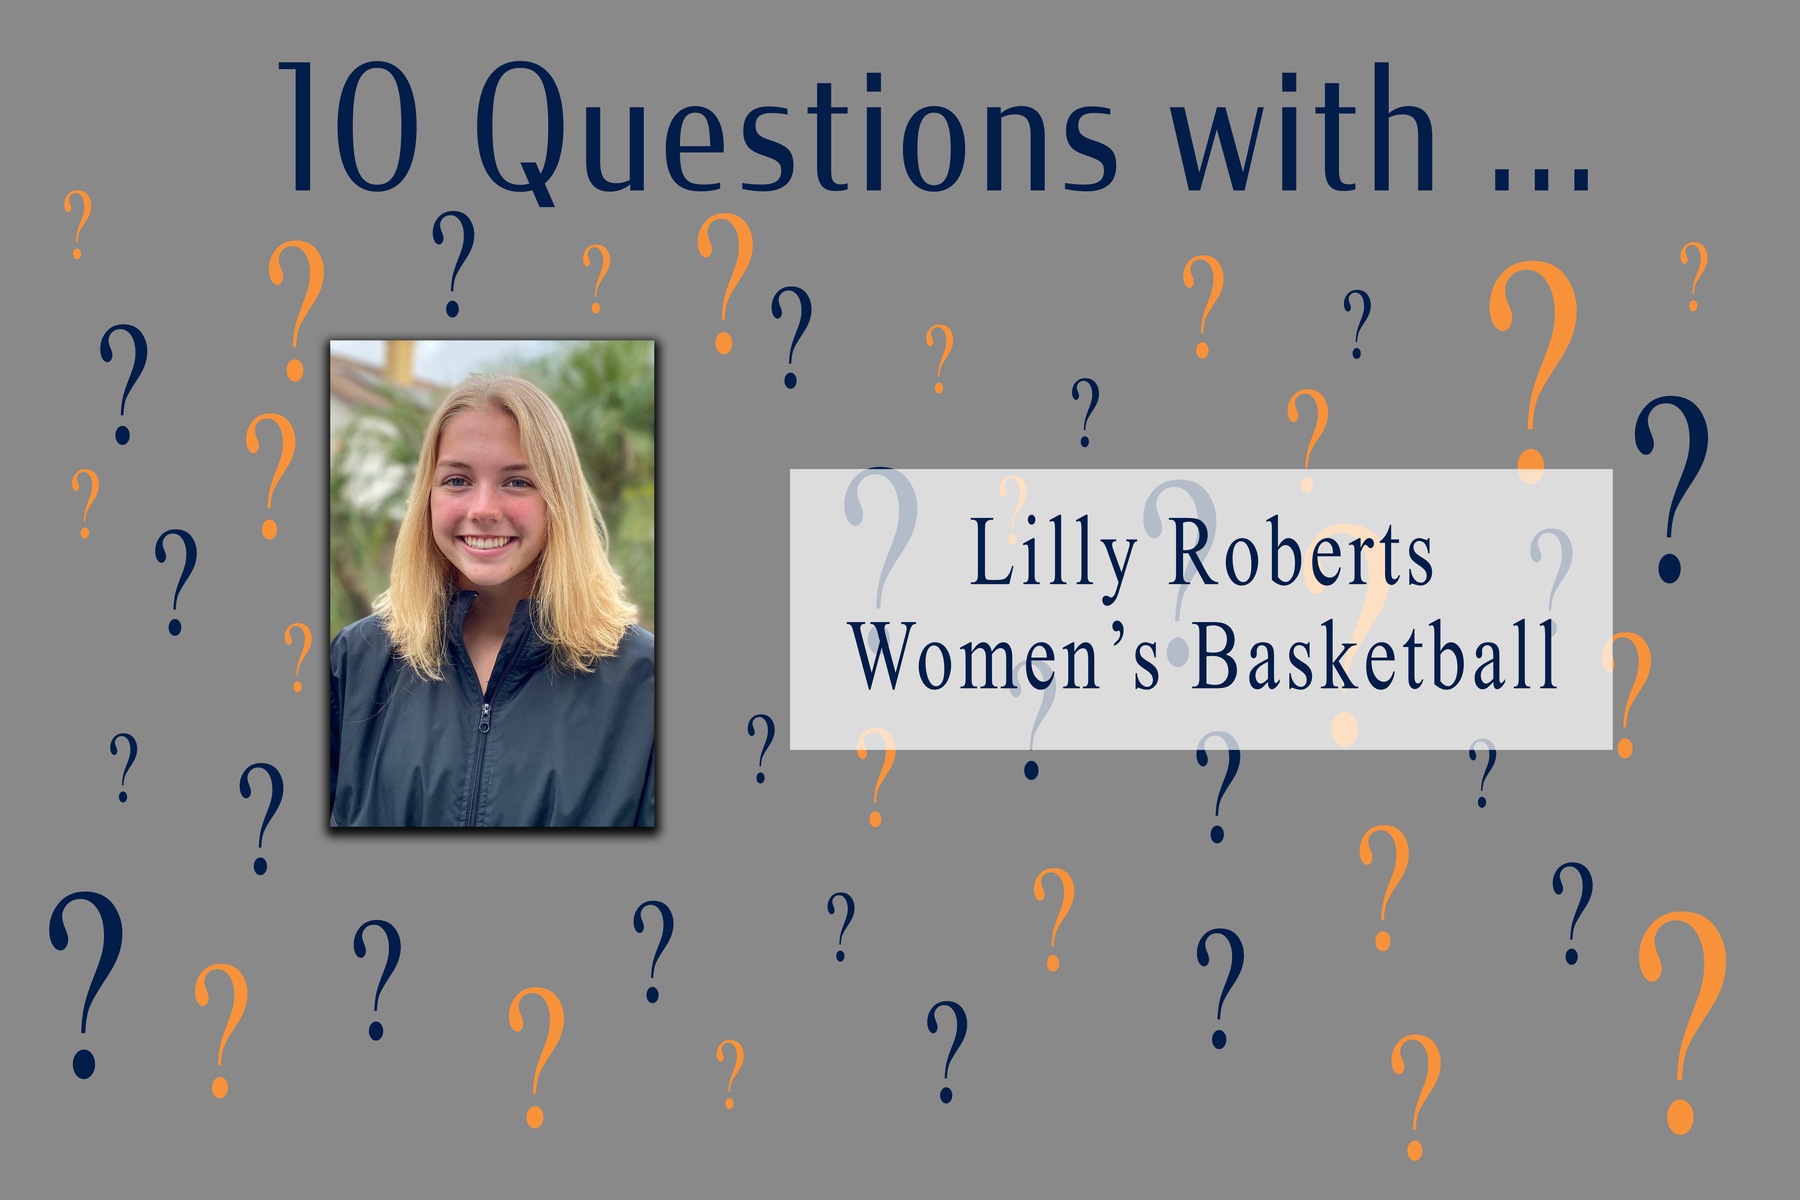 10 Questions With ... Lilly Roberts -- Women's Basketball